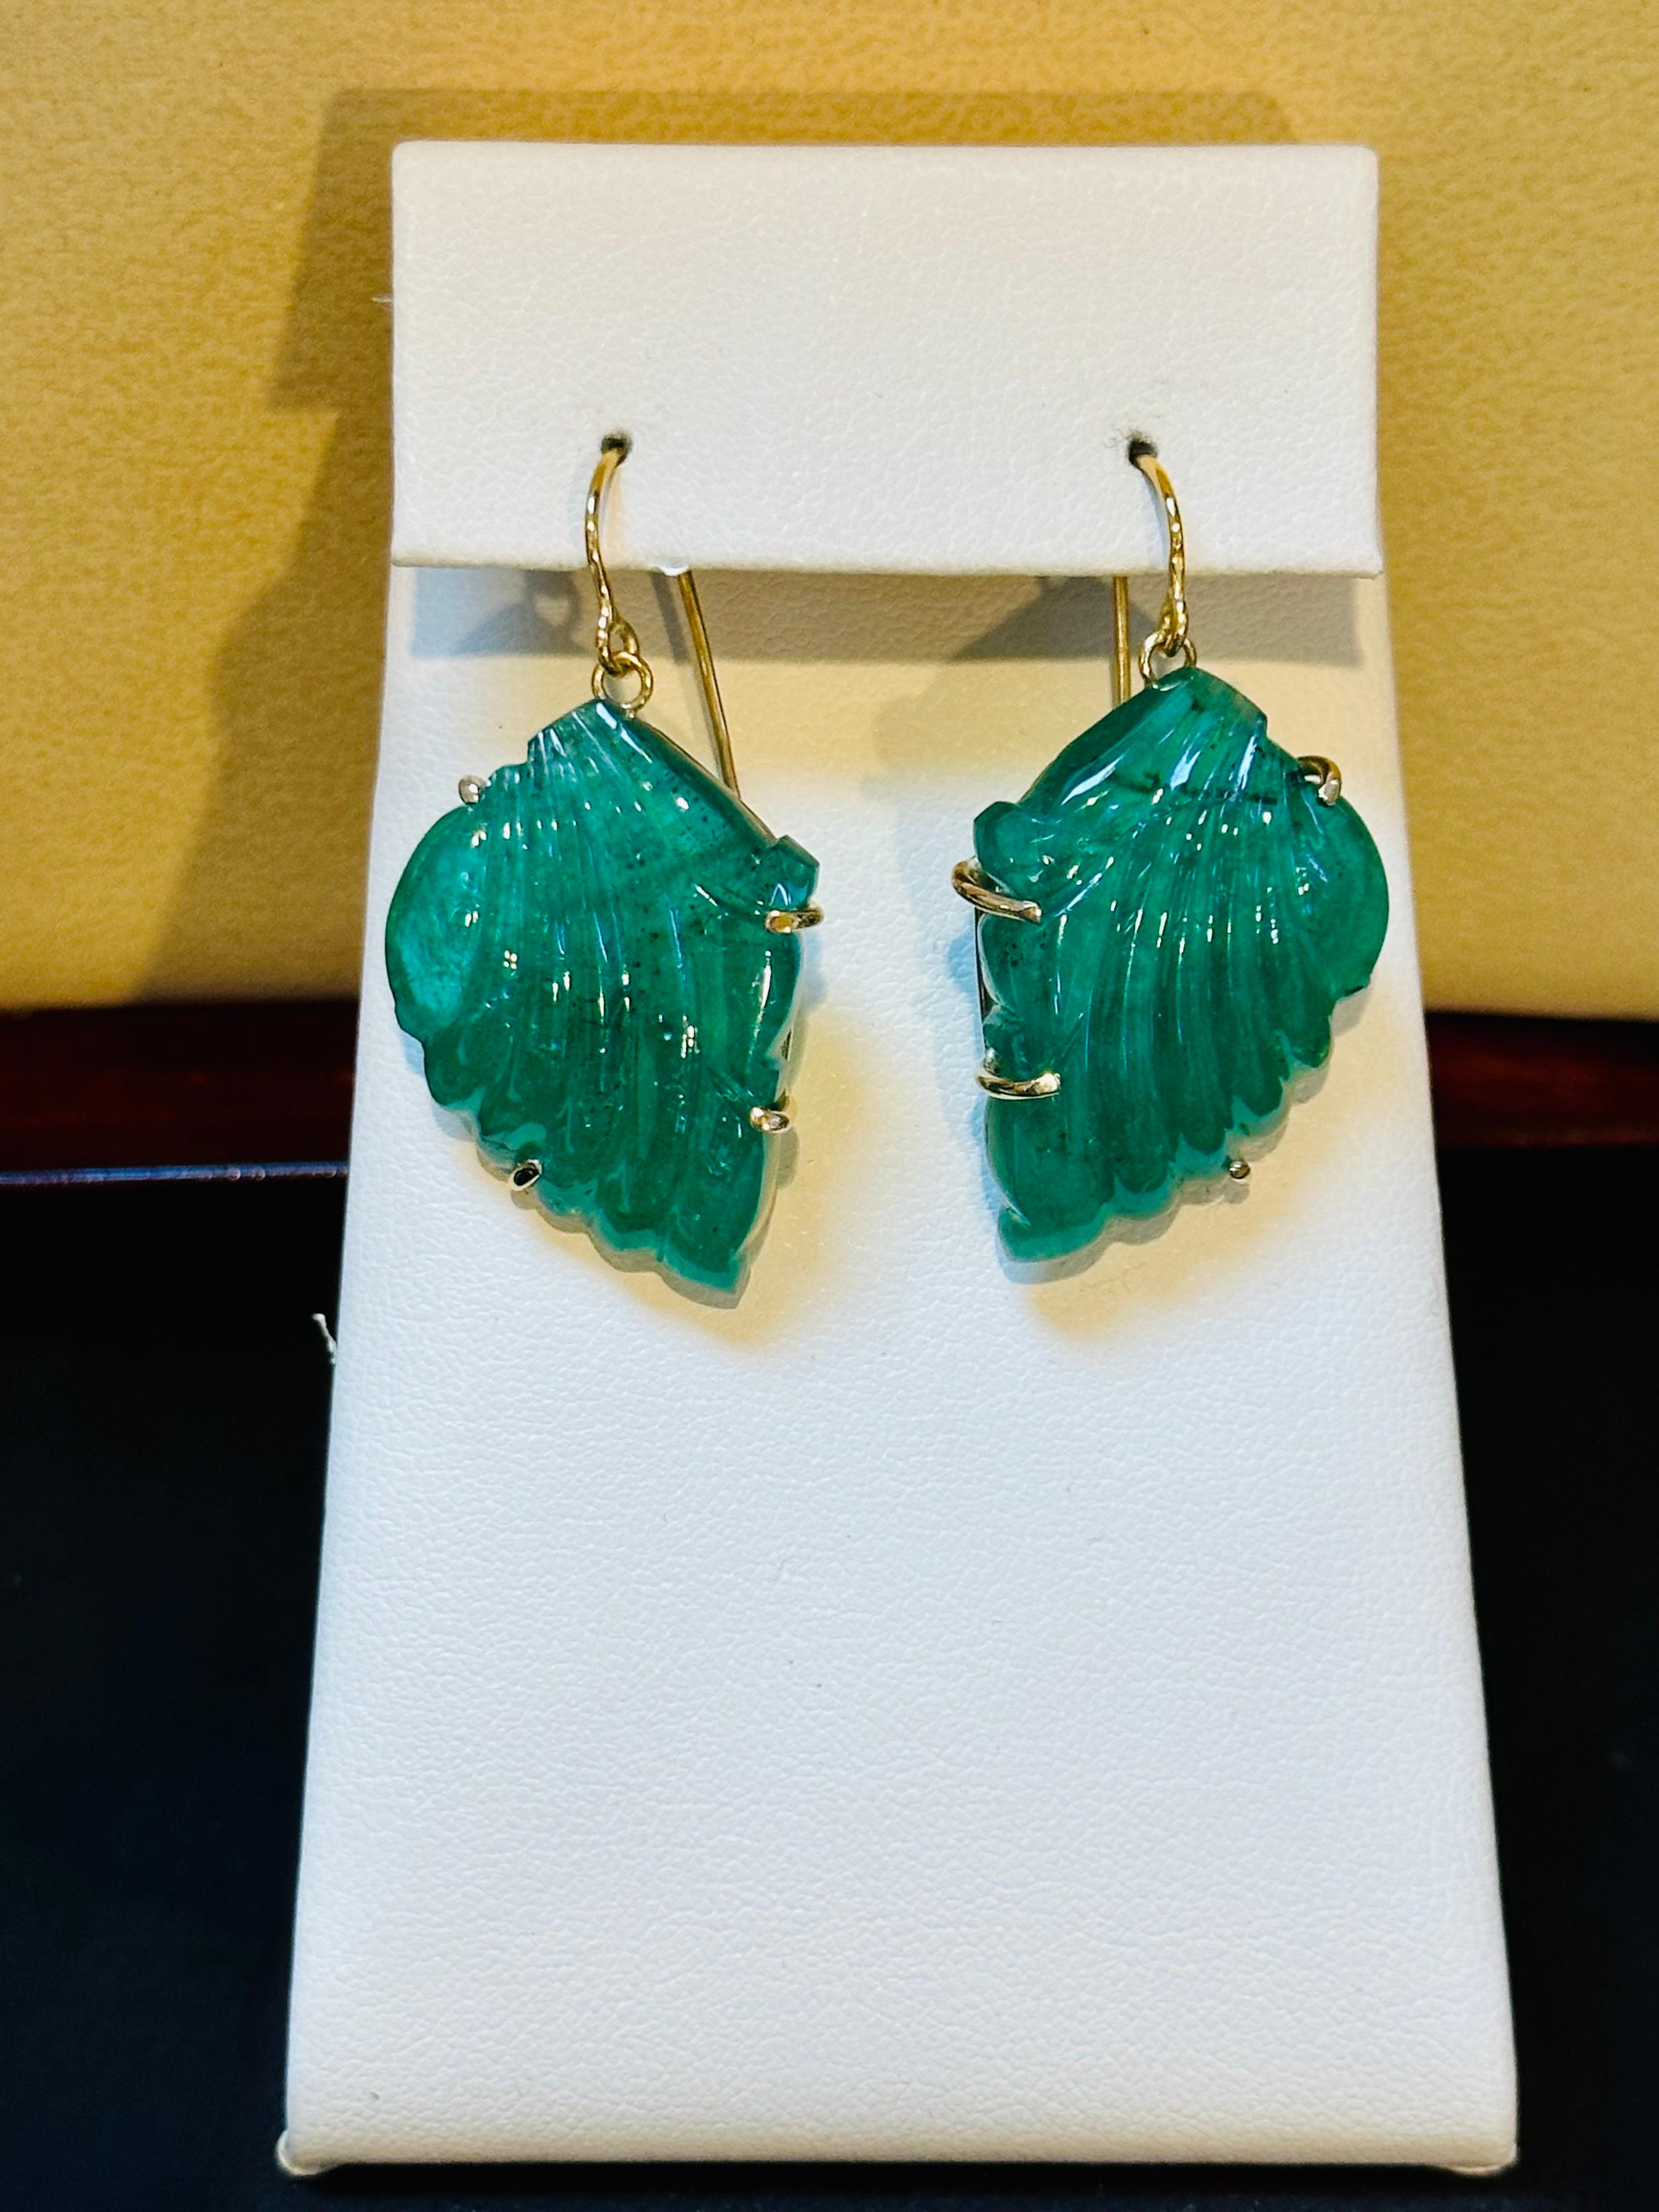 55 Ct Carved Emerald Leaf Shape Earrings 14 Kt Yellow Gold French Wire Earring In Excellent Condition For Sale In New York, NY